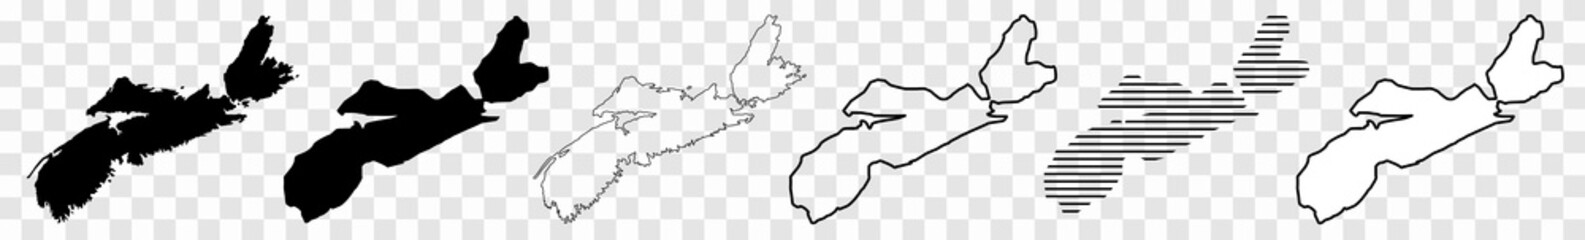 Nova Scotia Map Black | Province Border | Canada State | Canadian | America | Transparent Isolated | Variations